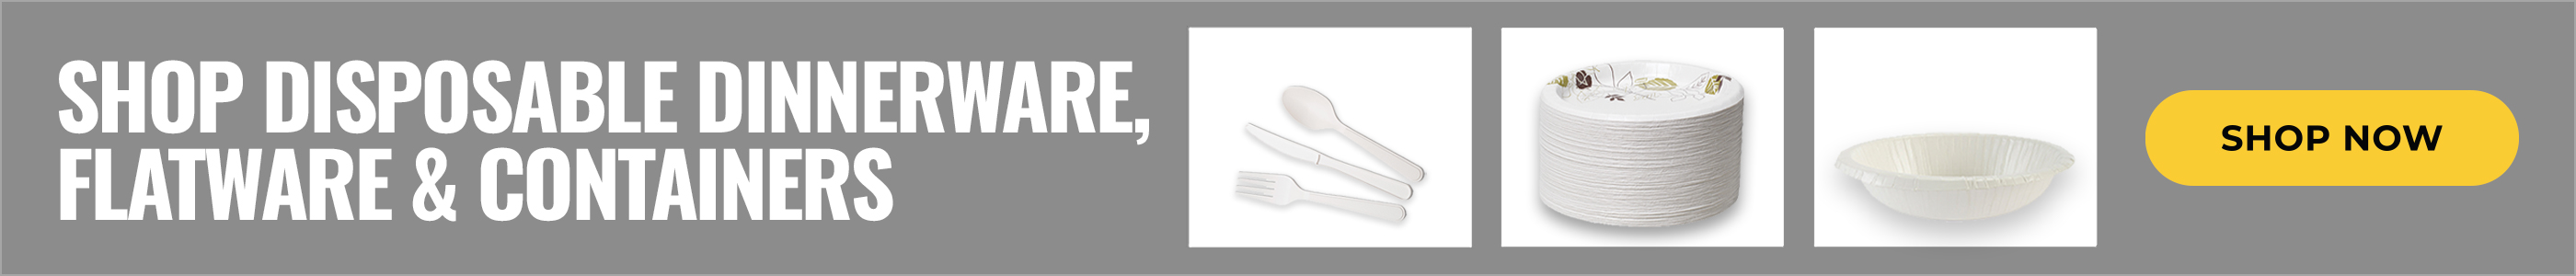 Shop Disposable Dinnerware, Flatware & Containers